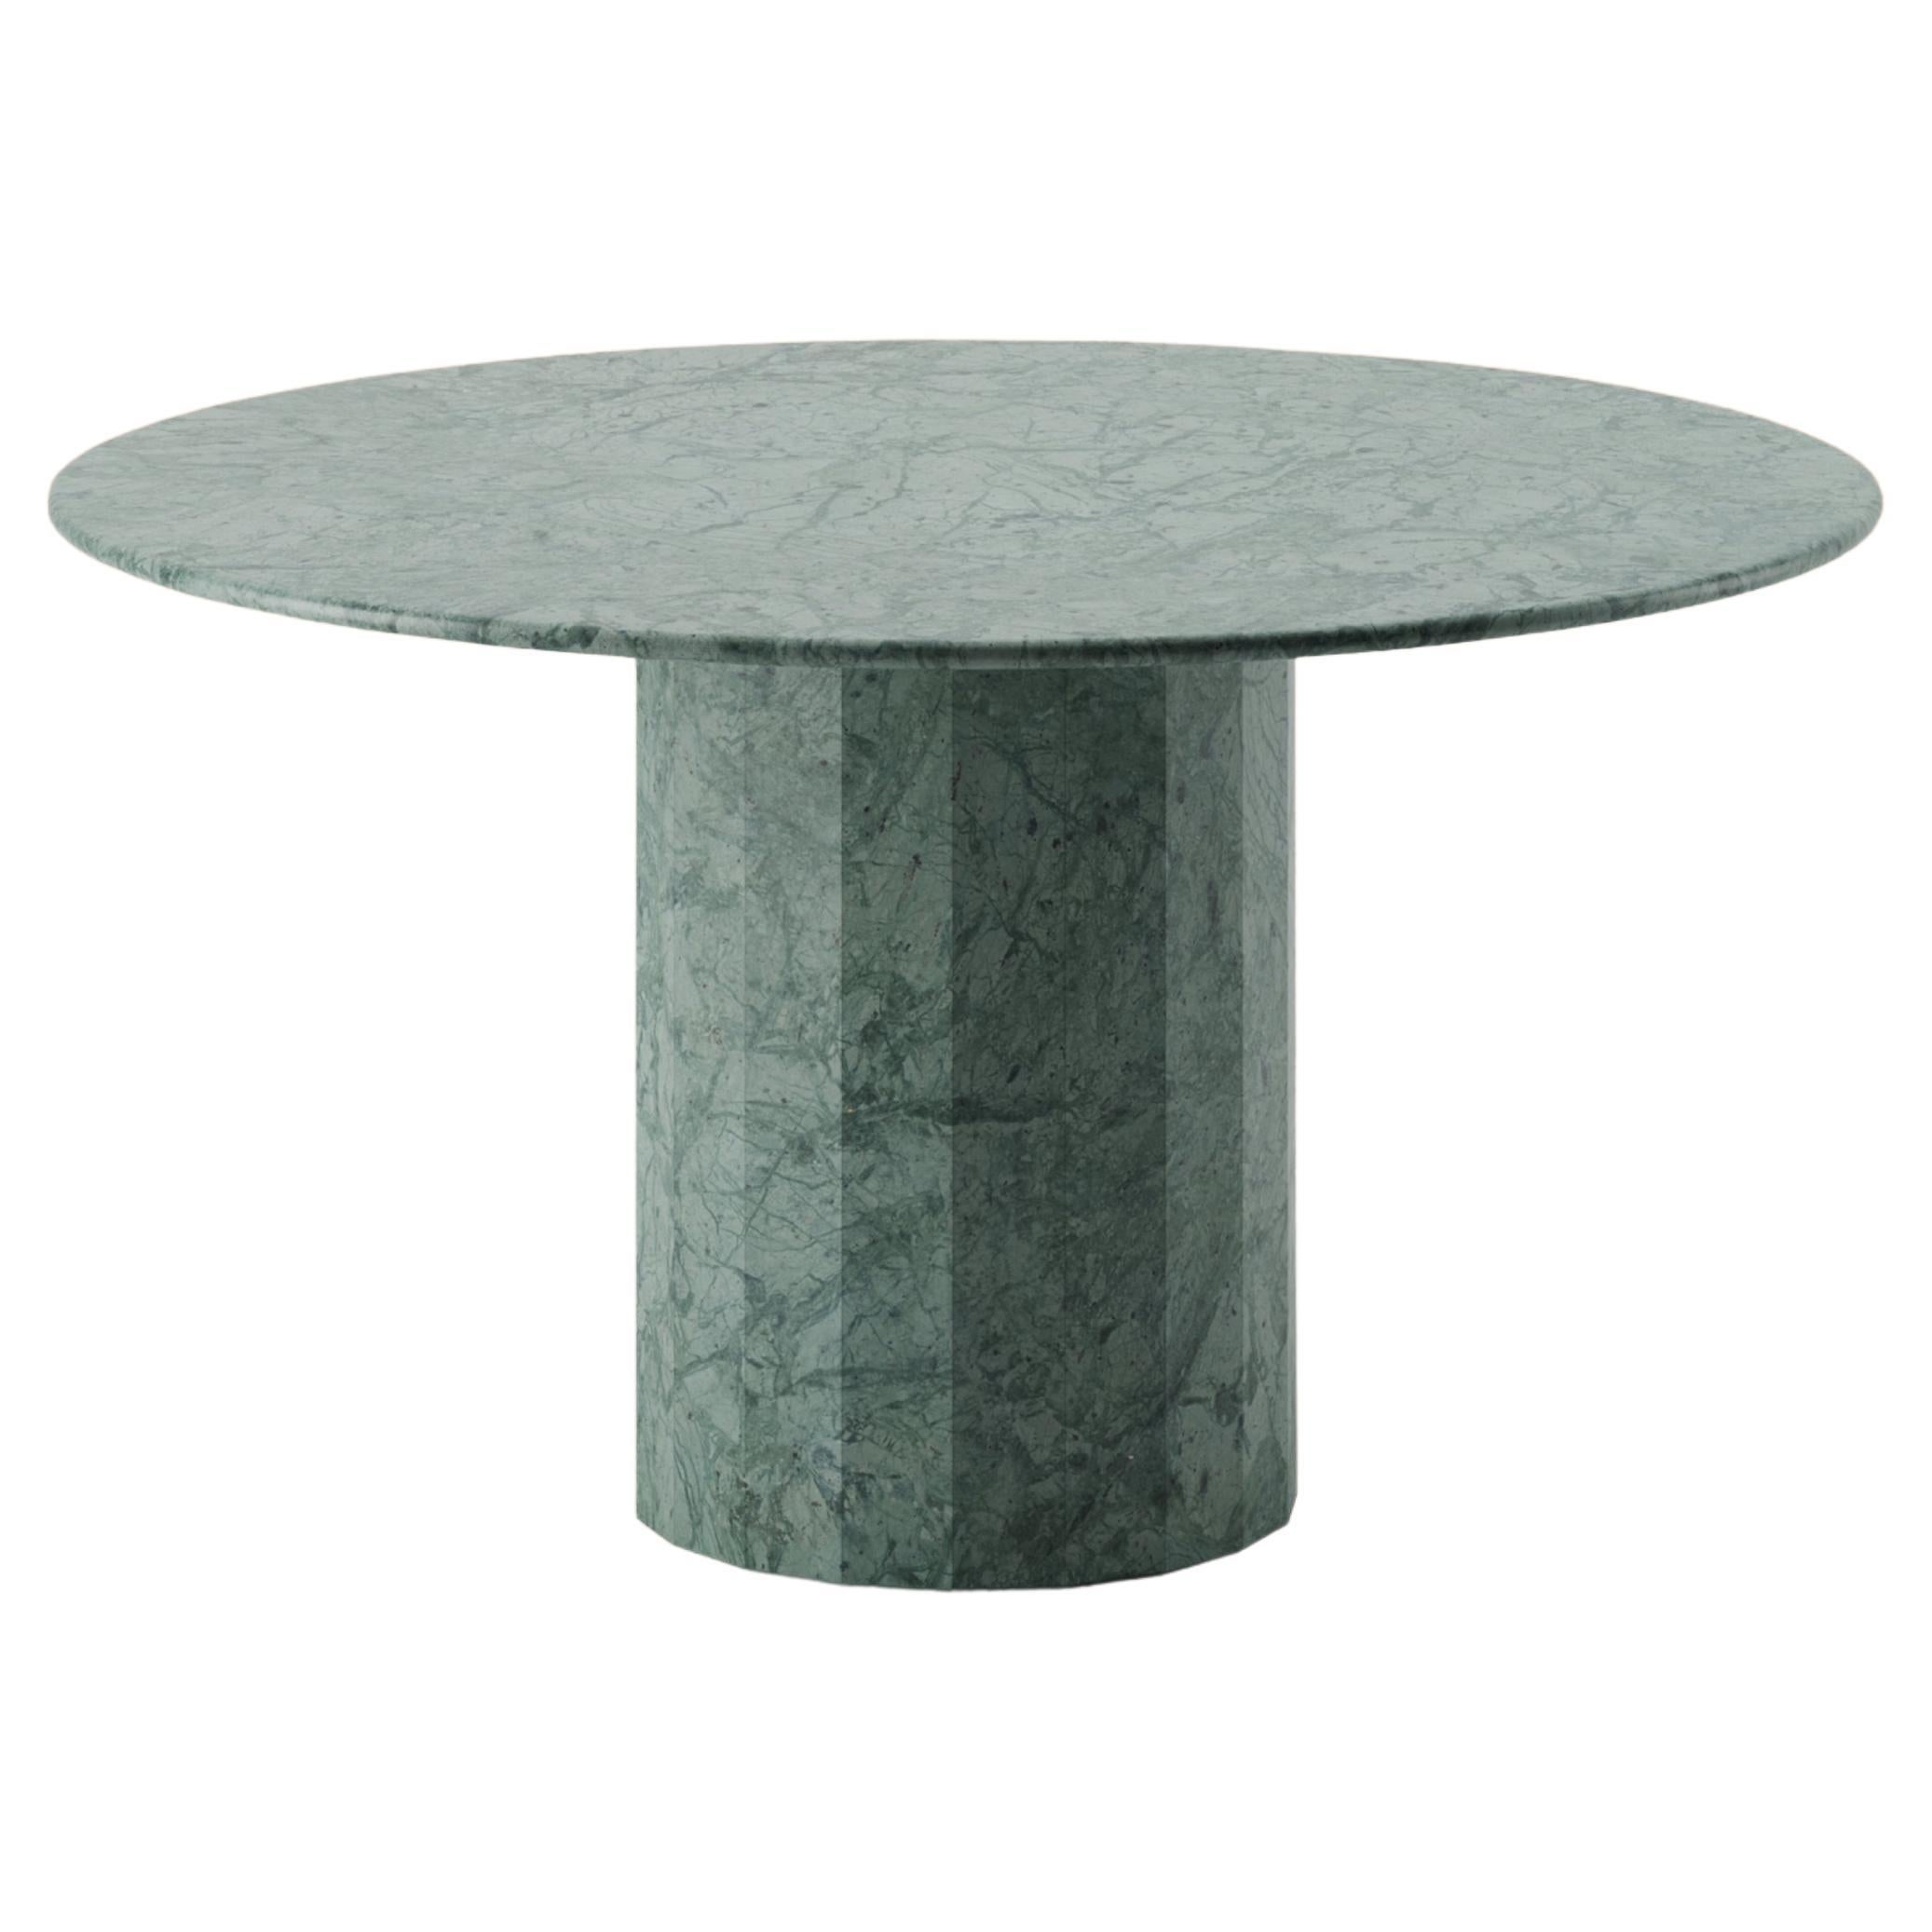 Ashby Round Dining/Hall Table Handcrafted in Honed Verde Guatemala Marble